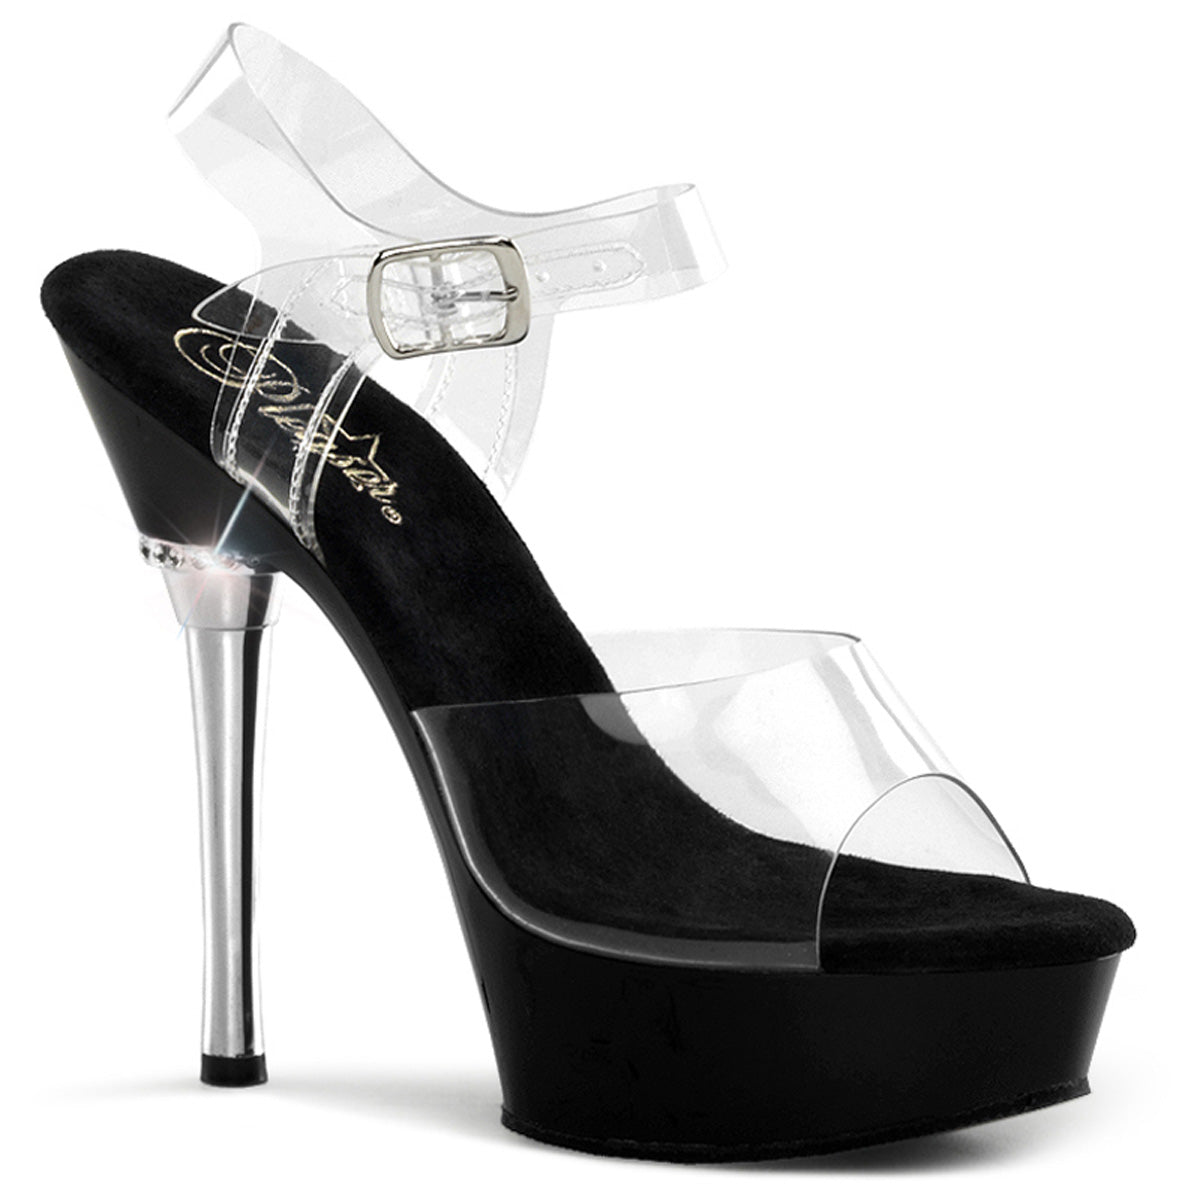 ALLURE-608 5.5" Heel Clear and Black Stripper Shoes